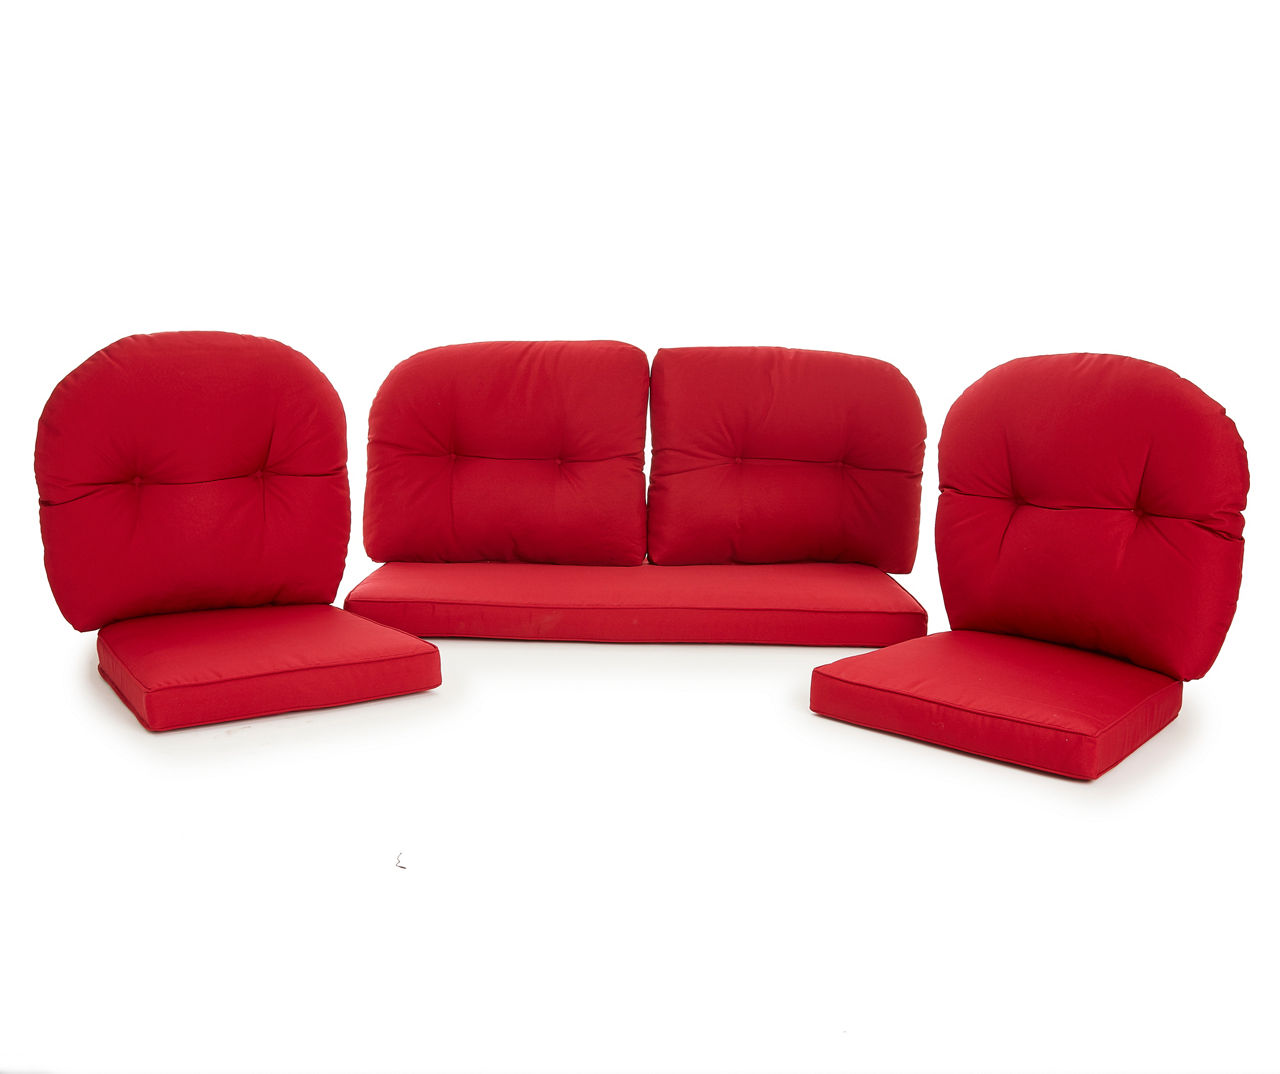 Westwood Red 7-Piece Replacement Cushion Set